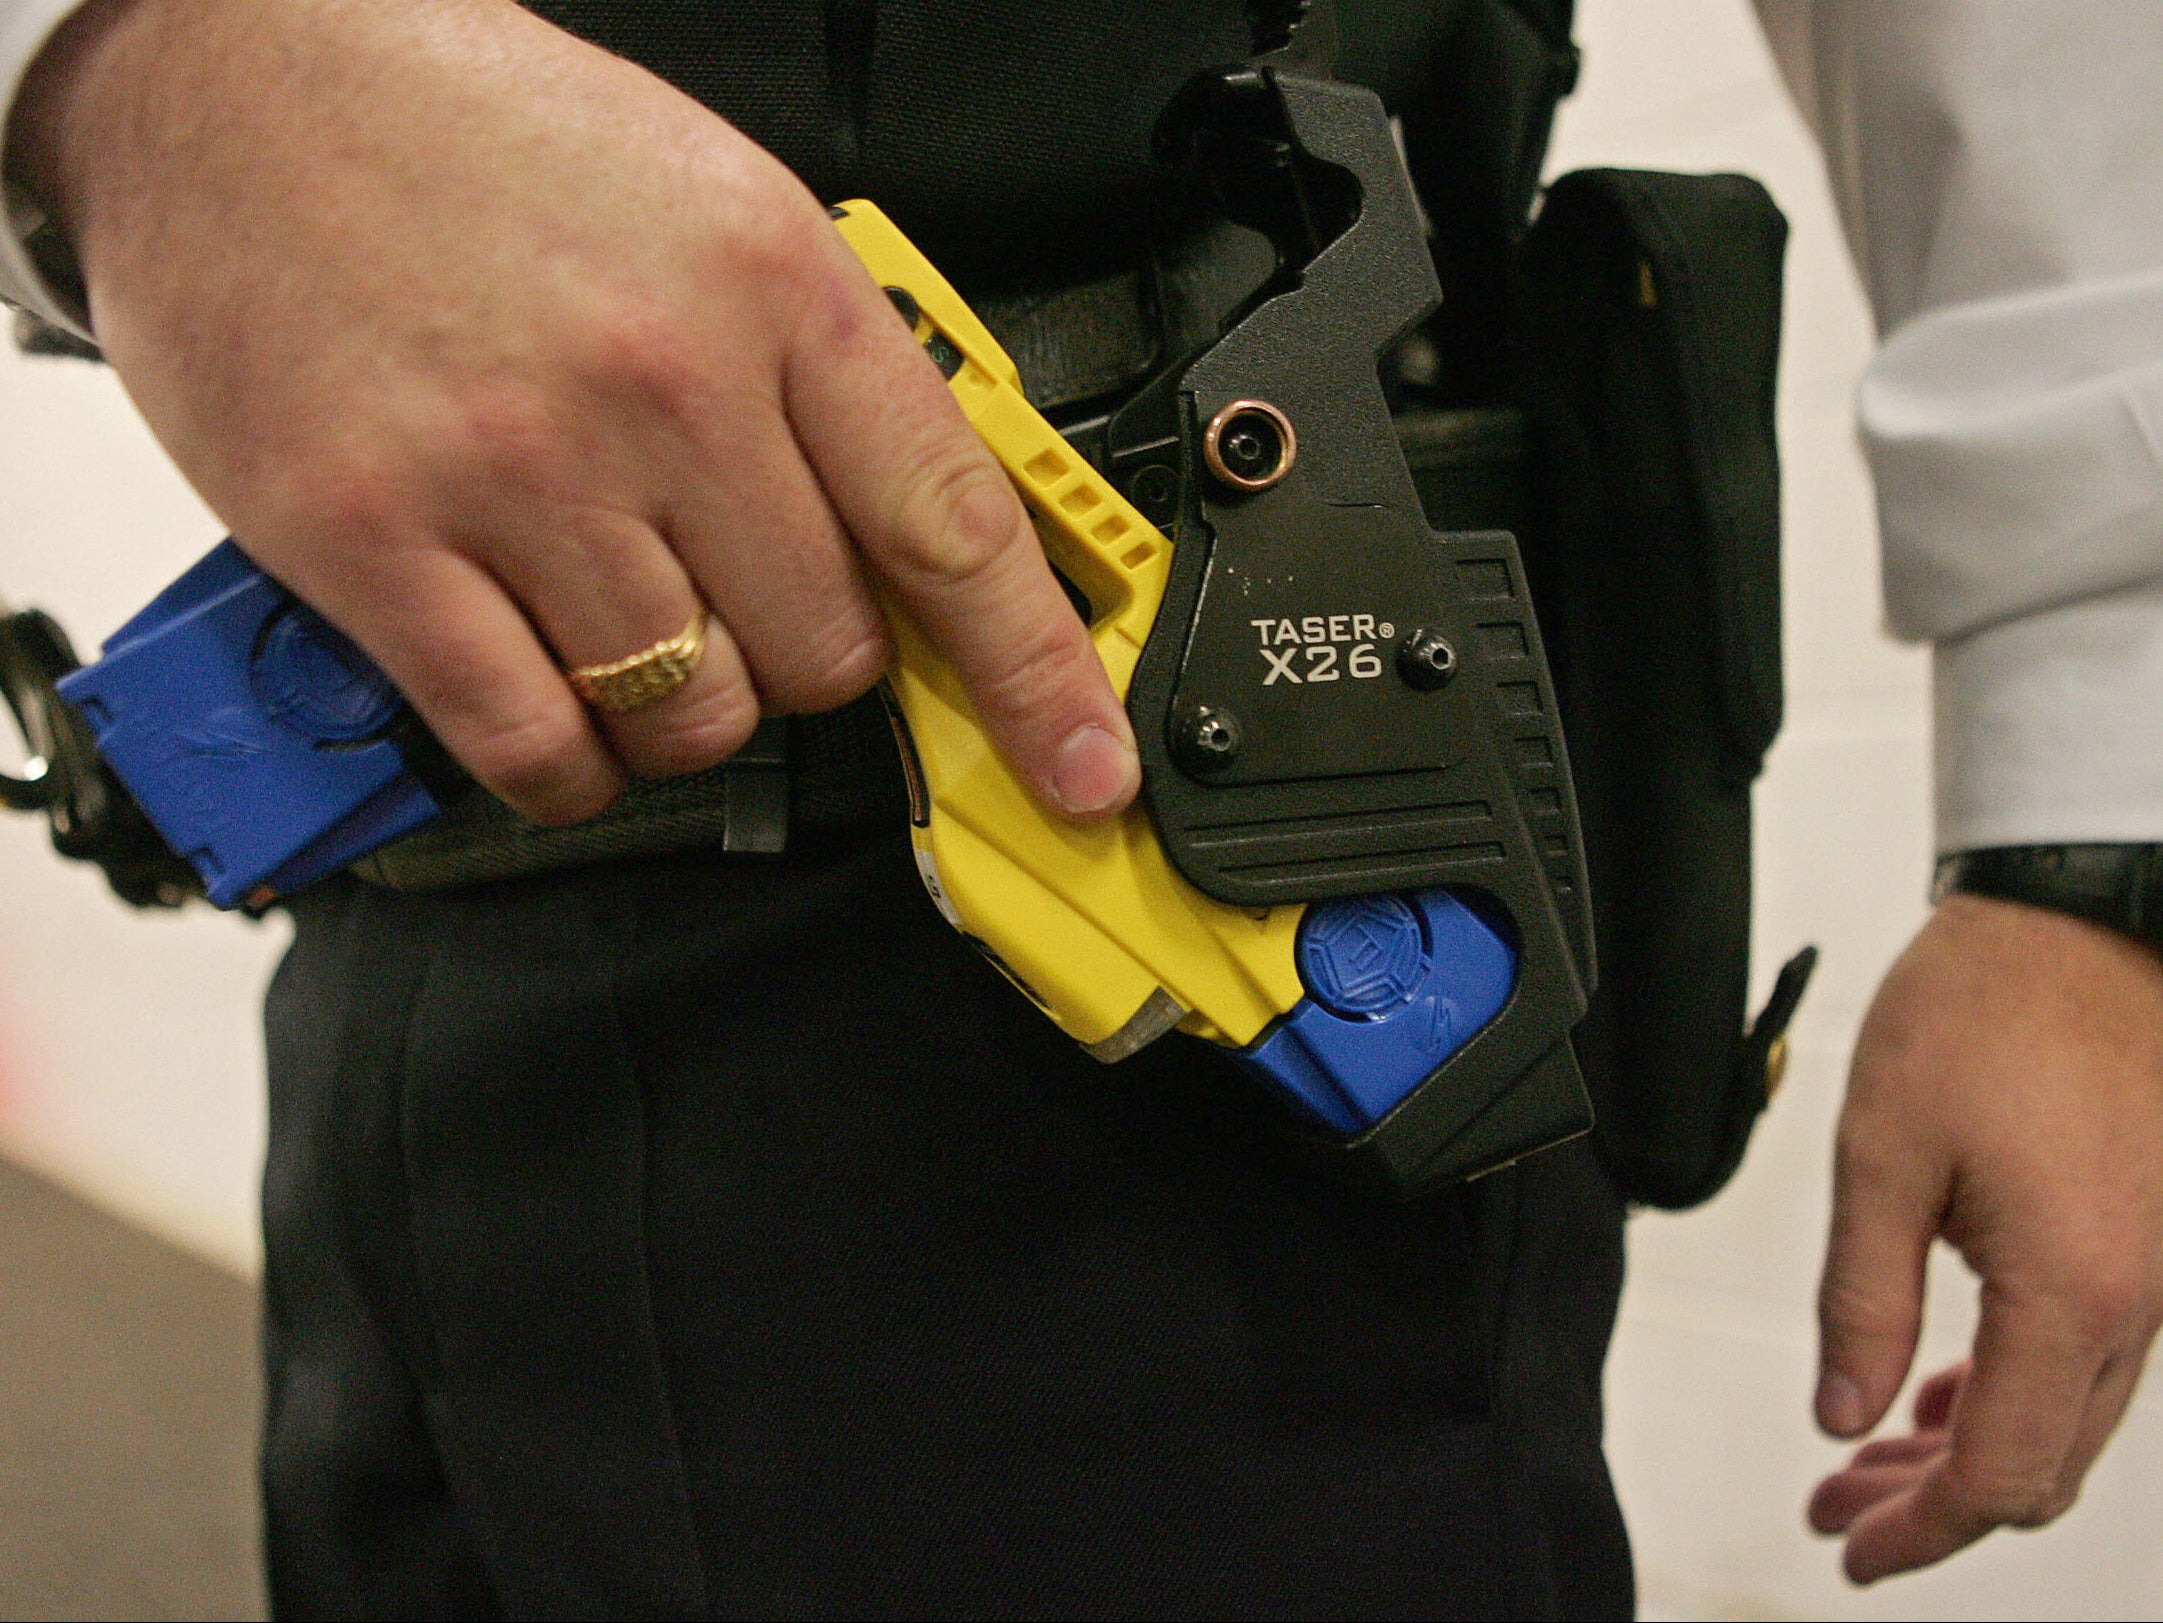 A British police officer holsters a taser gun at the Metropolitan Police Specialist Training Centre in Kent